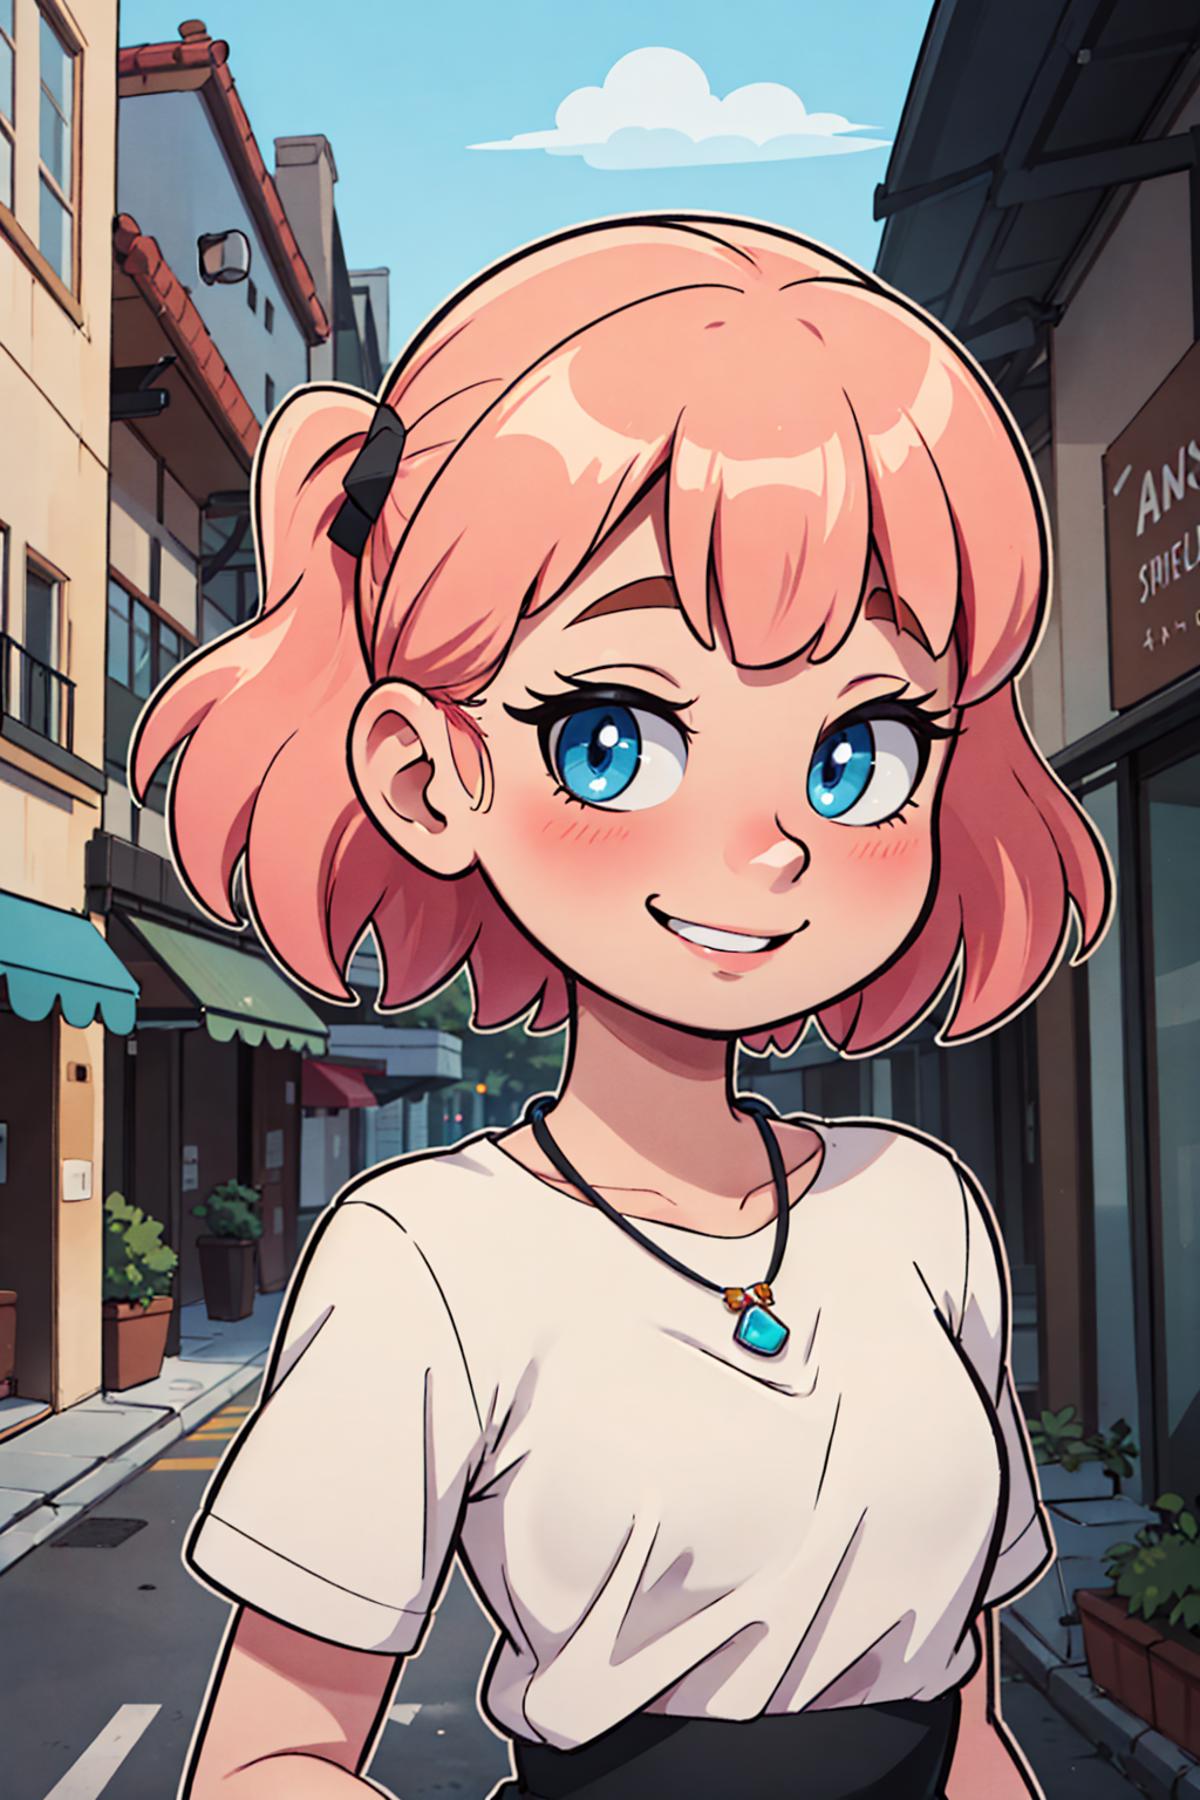 A cartoon drawing of a girl with pink hair wearing a white shirt and a necklace.